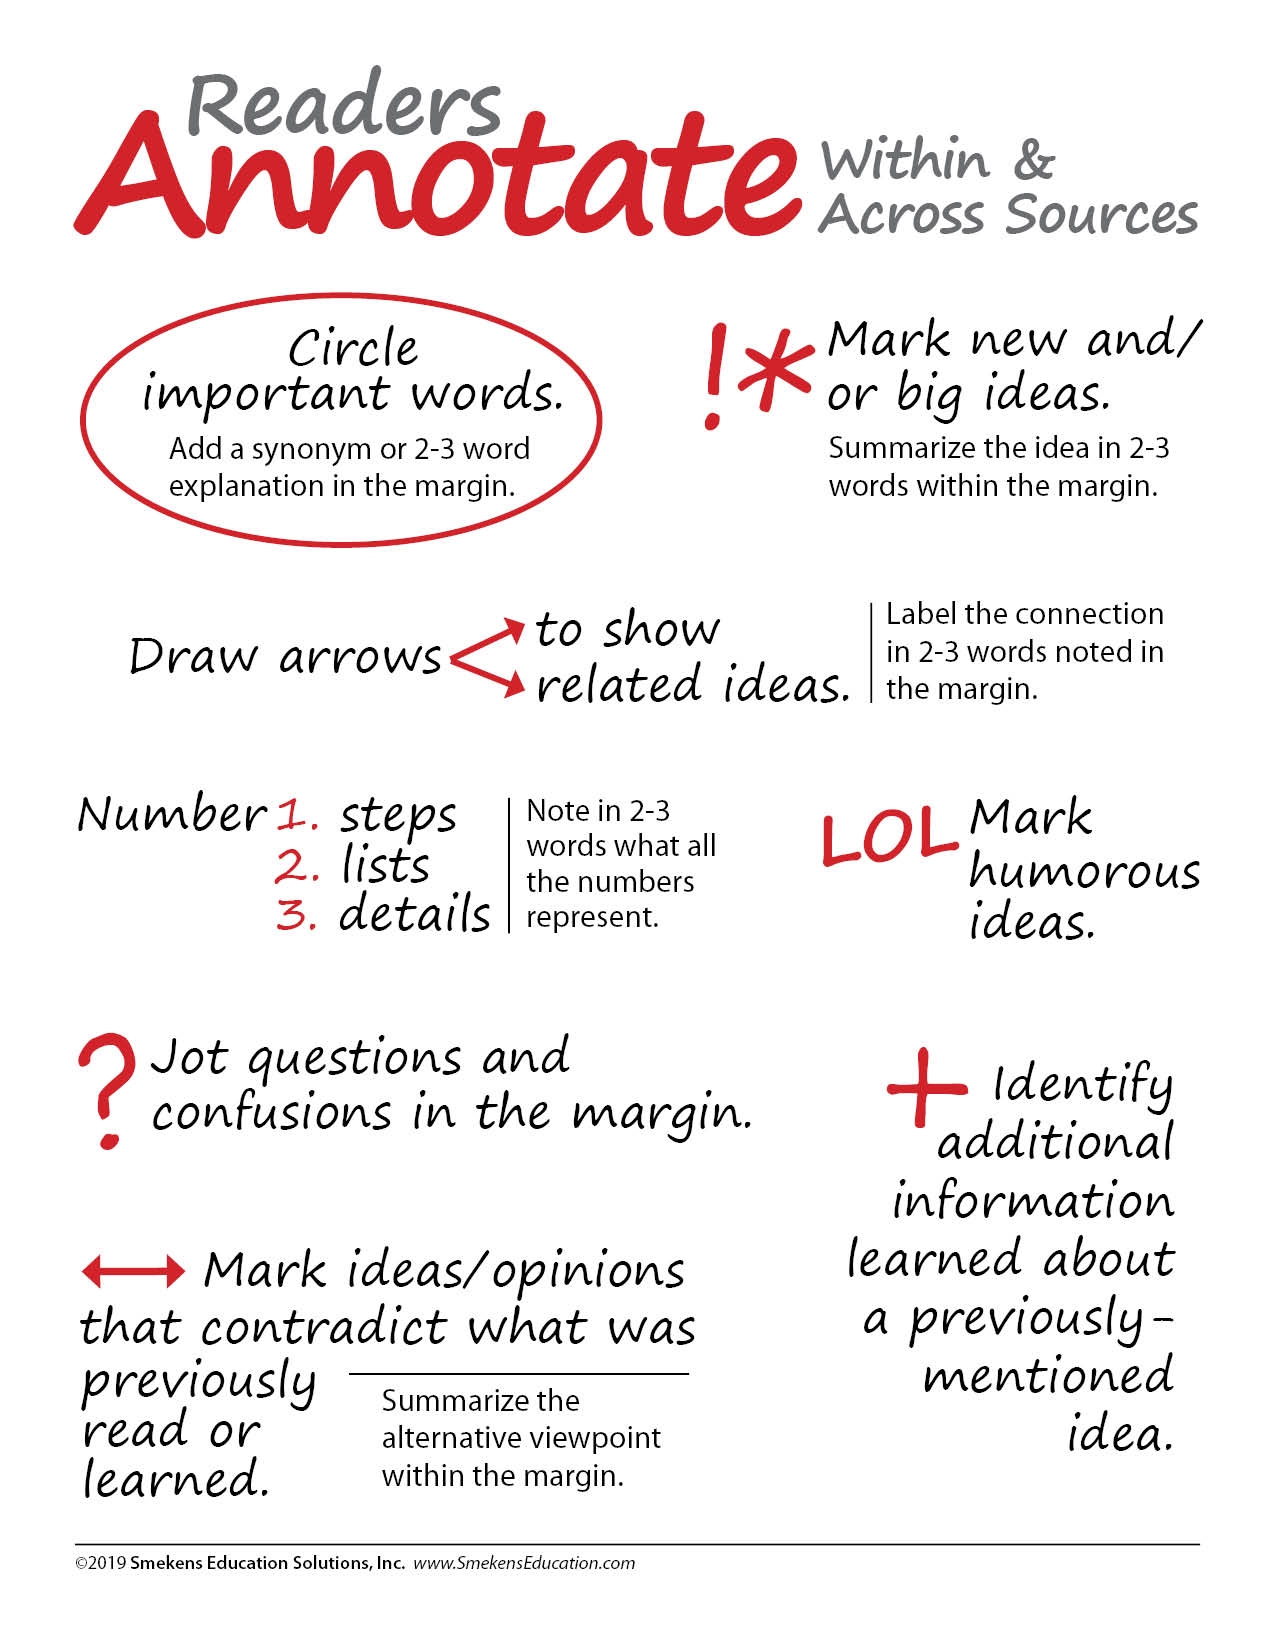 Readers Annotation - Student Handout